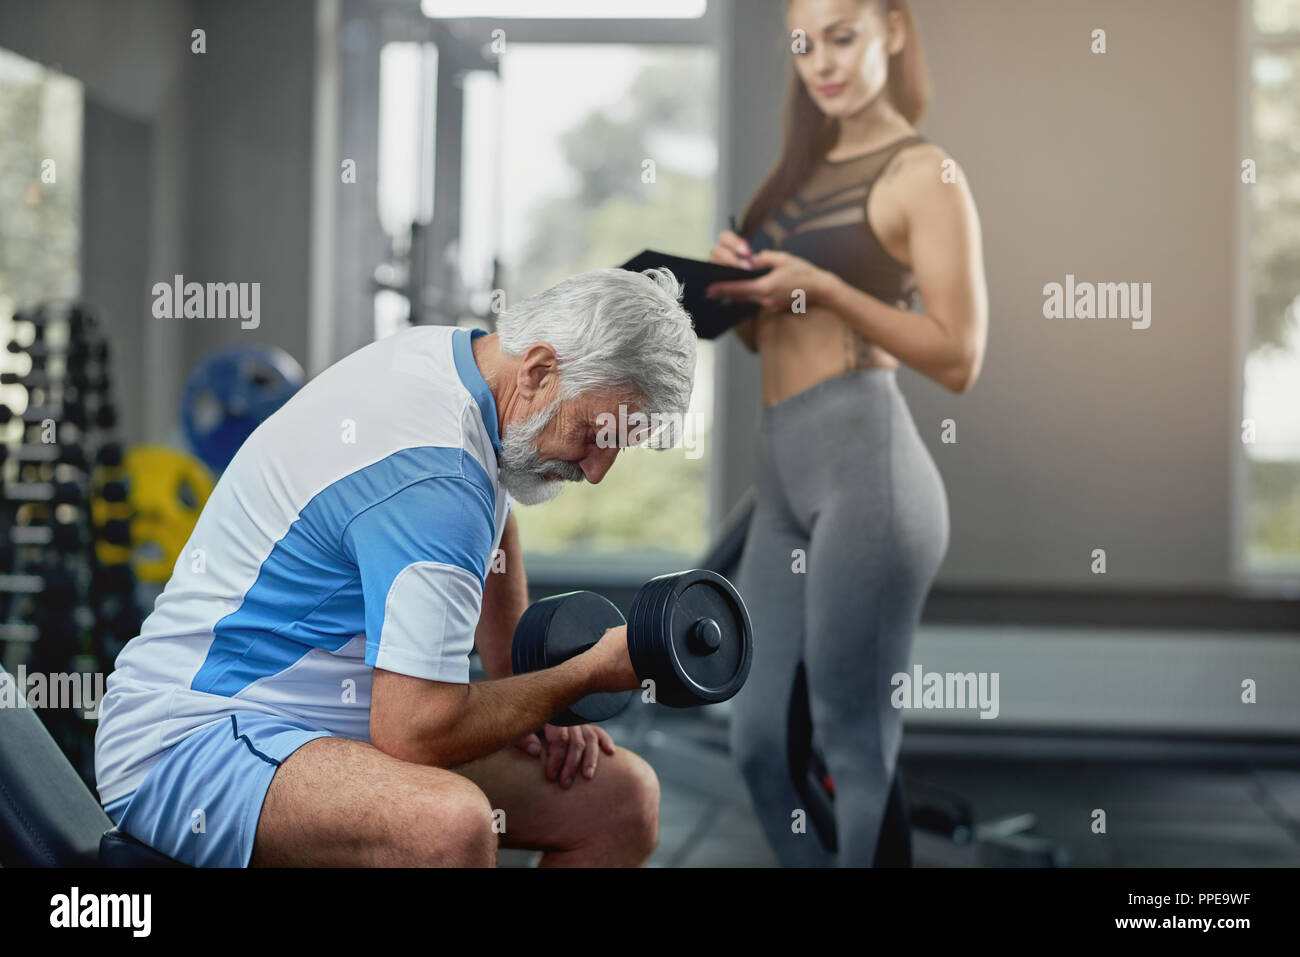 Beautiful girls with long hair is training in the gym with weights. Personal  fitness trainer is at work doing exercises for good muscles. Sport  motivation healthy lifestyle. Woman body workout. Stock Photo